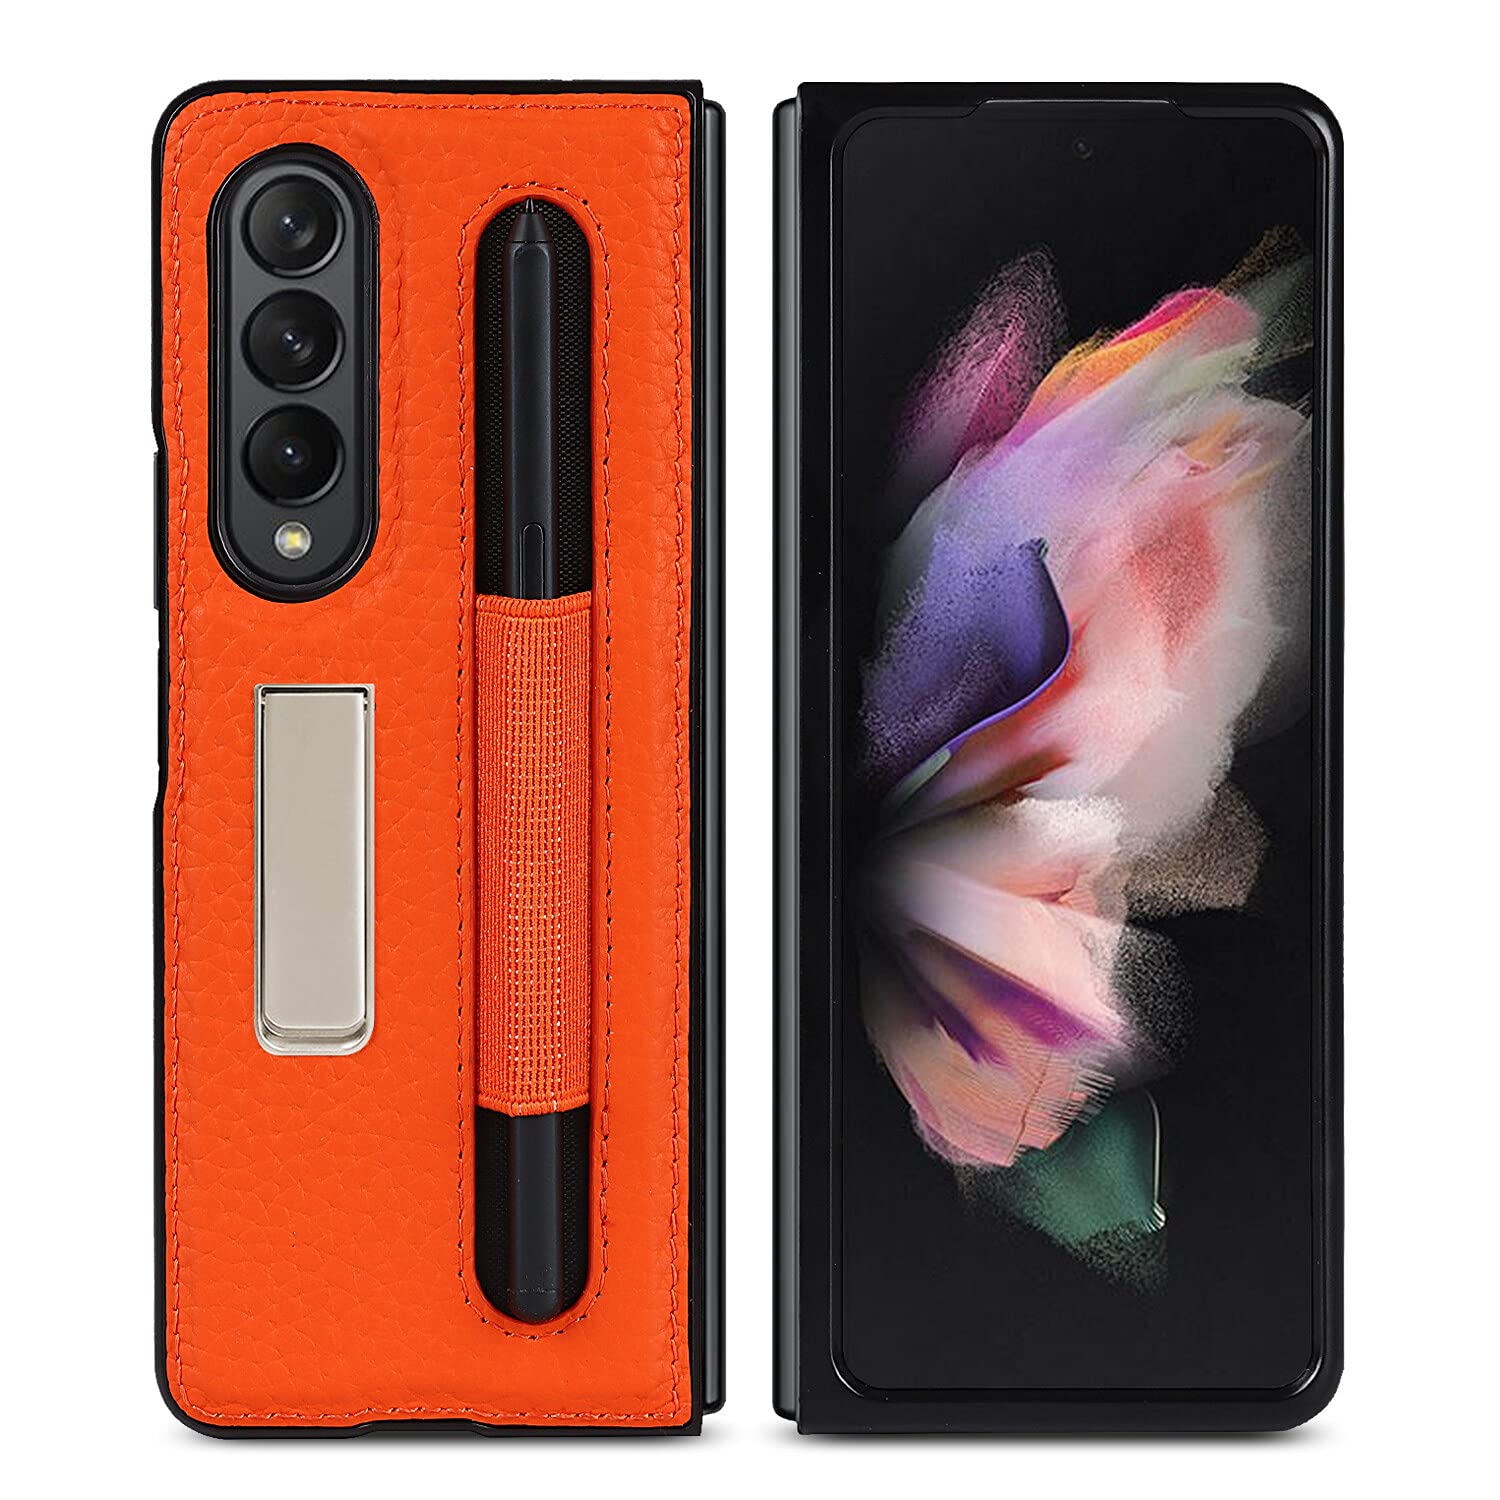 NUOUN Case for Samsung Galaxy Z Fold 3 5G (2021) with Stand, Magnetic Kickstand  Genuine Leather Protective Case - (Orange)